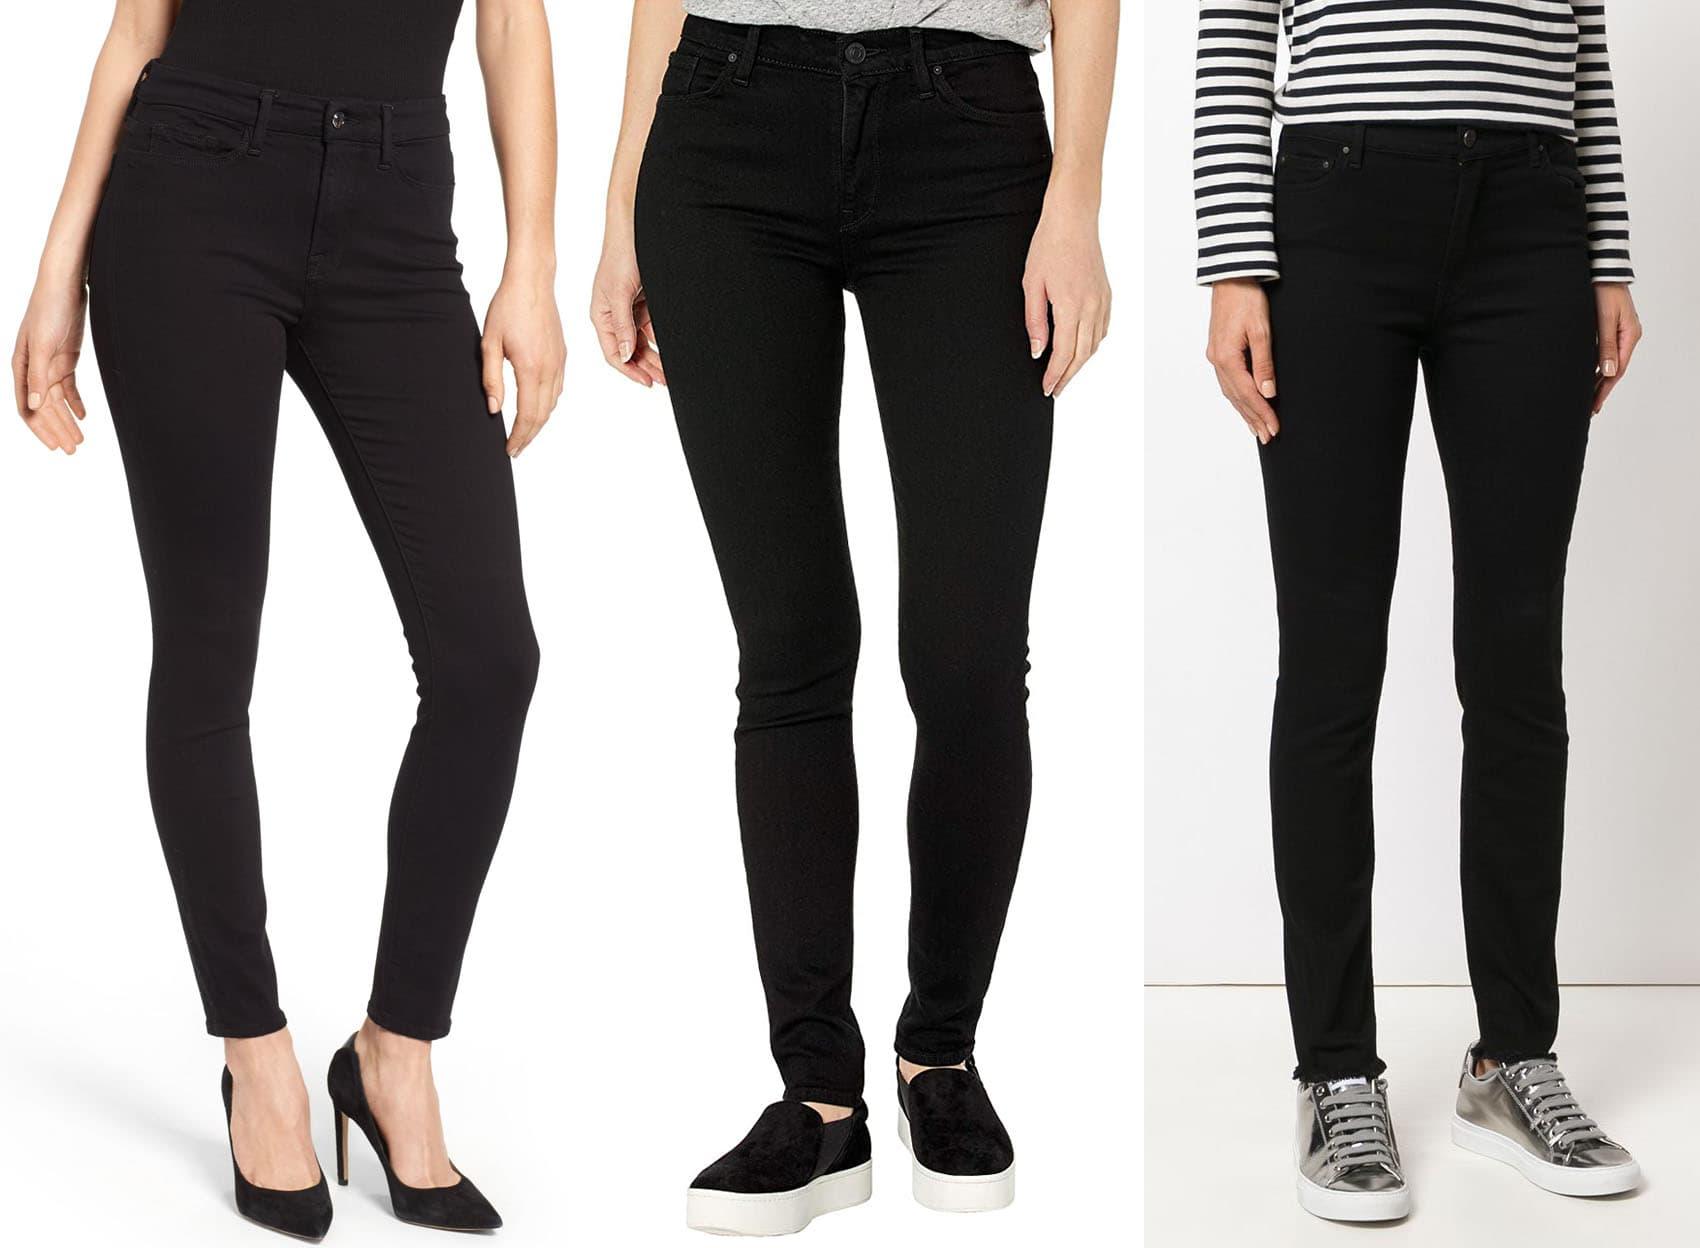 Sleek and Sophisticated: Featuring Good American's High-Rise Skinny Jeans, Hudson Jeans' Super Skinny High-Waist, and Mr & Mrs Italy's Stretch Skinny Jeans for a flattering fit